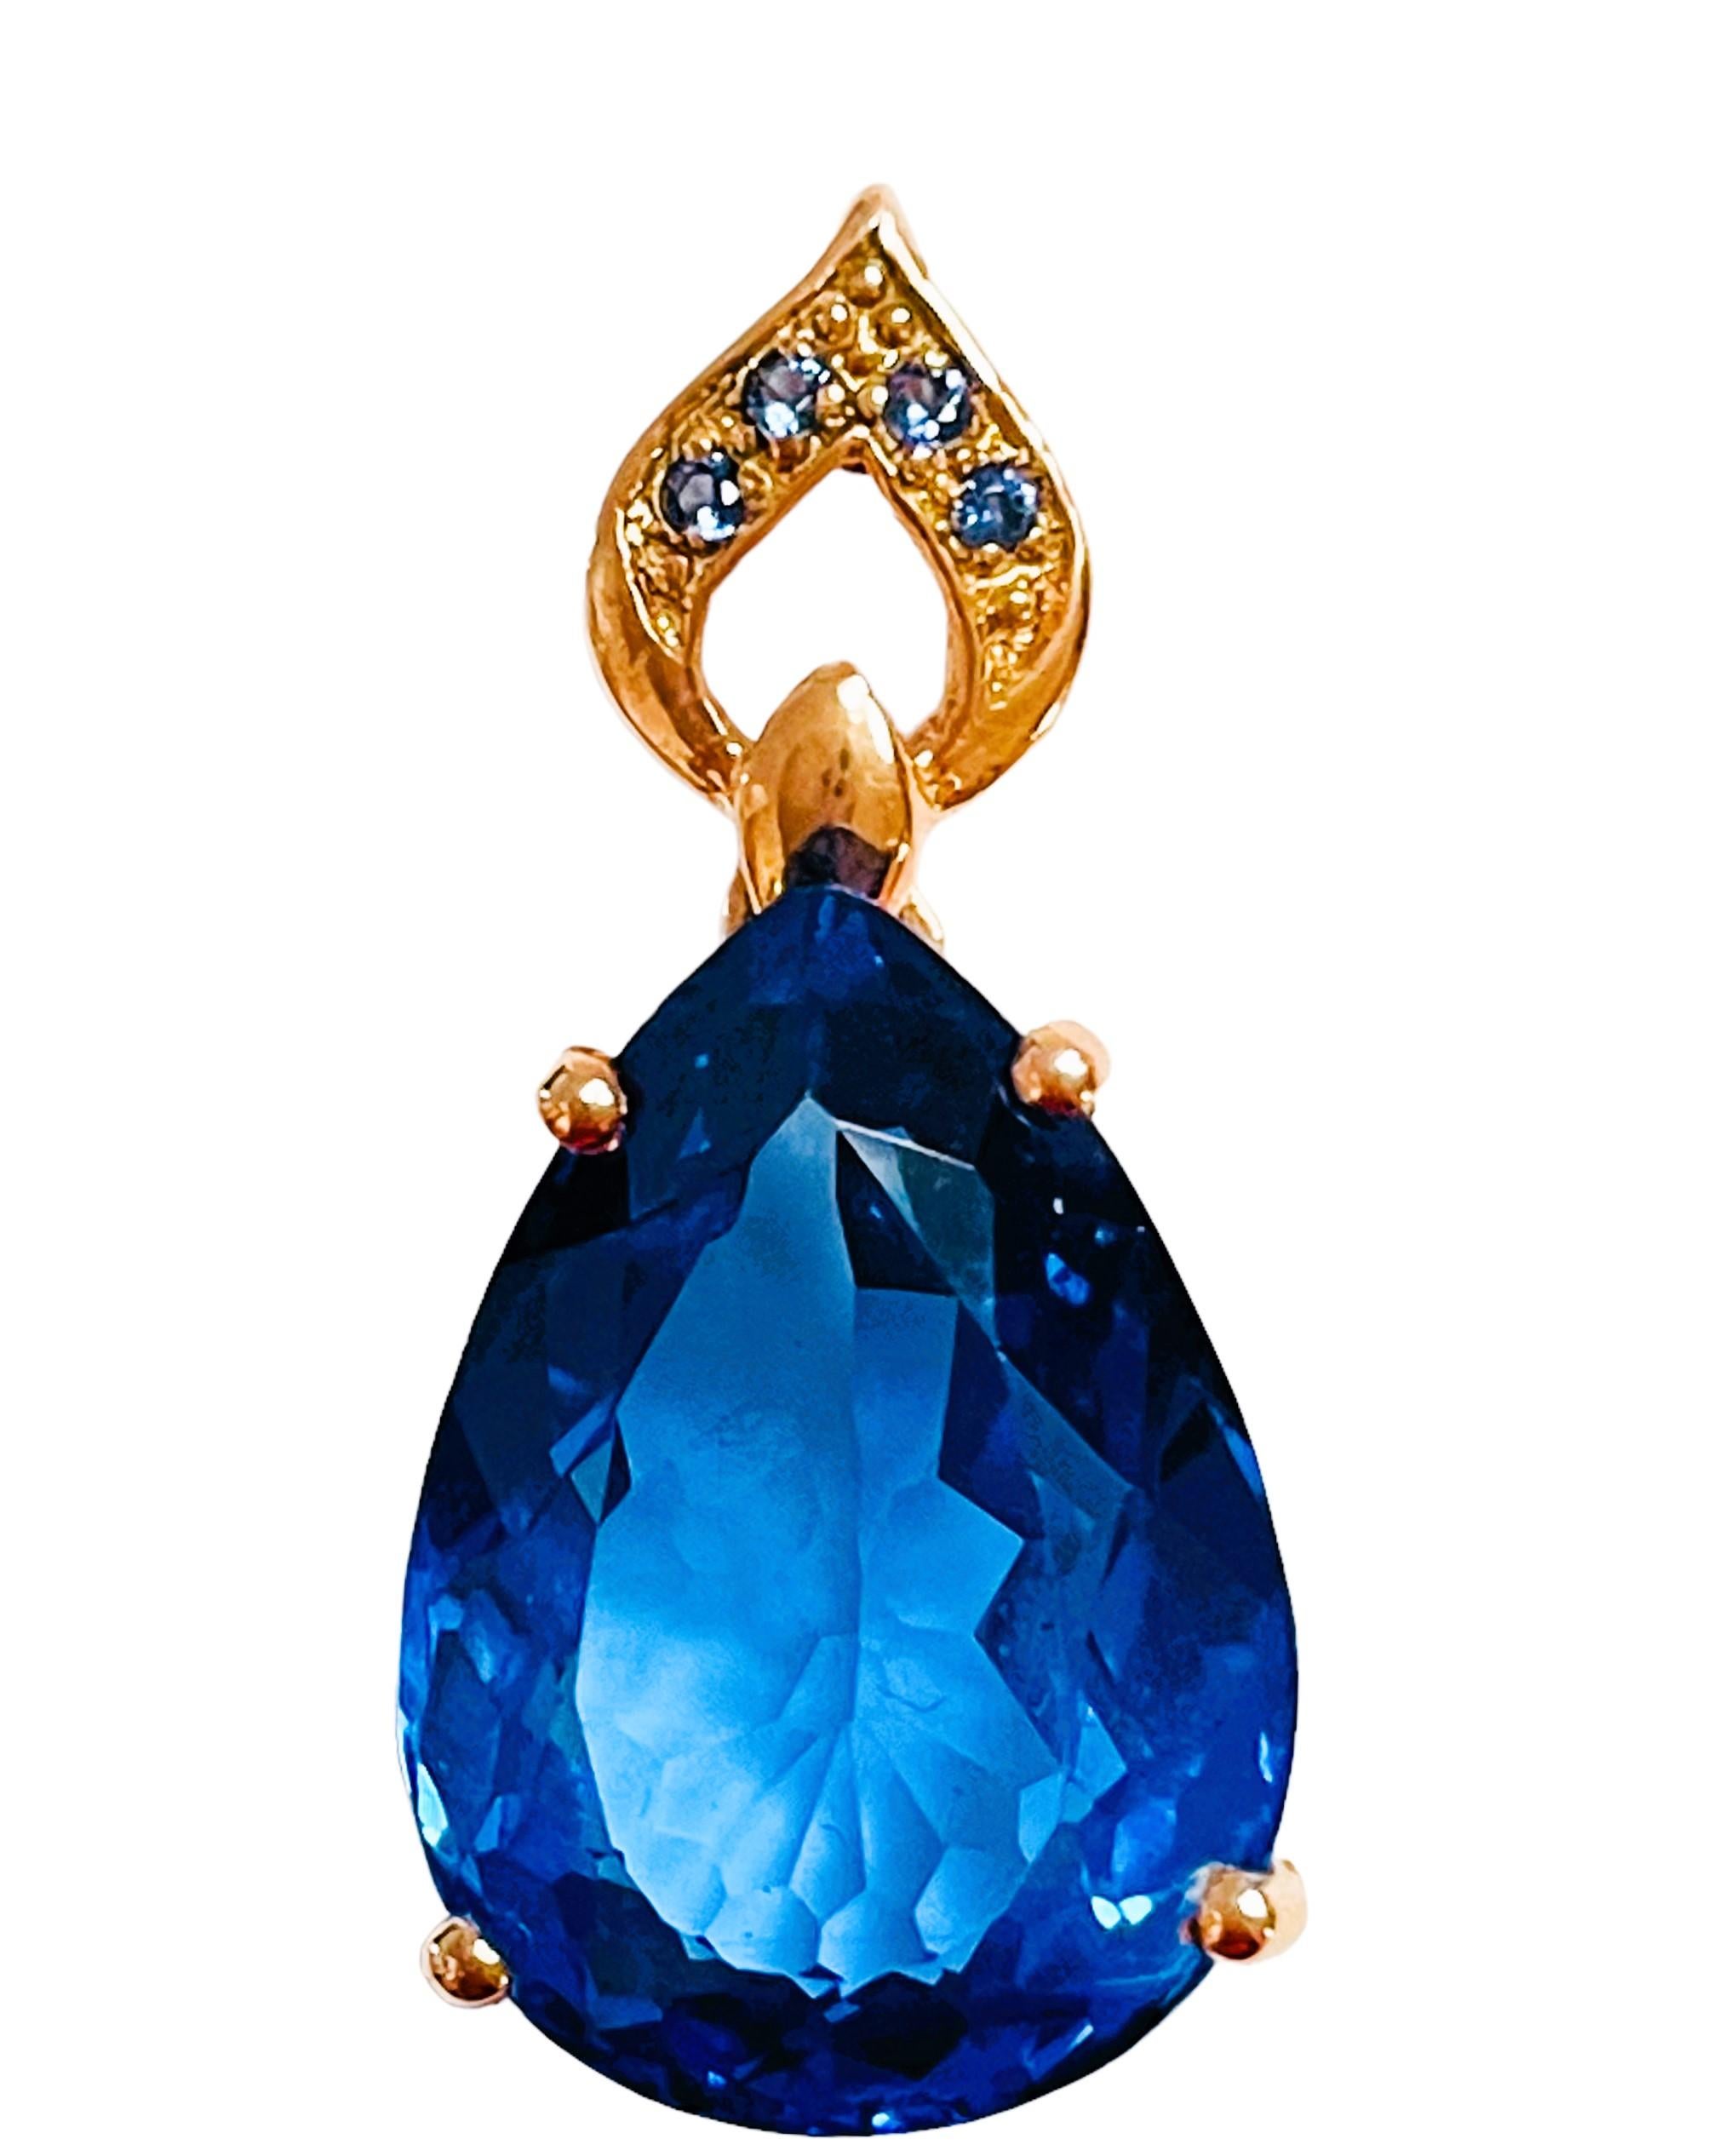 The stone was mined in Africa and is just exquisite. It is a highly rated IF (Internally Flawless) stone.  A gorgeous, very high quality stone. It is an pear cut stone and is 11.50 Cts.  It measures 17 x 12.3 mm. It has Blue Sapphires on the bezel. 